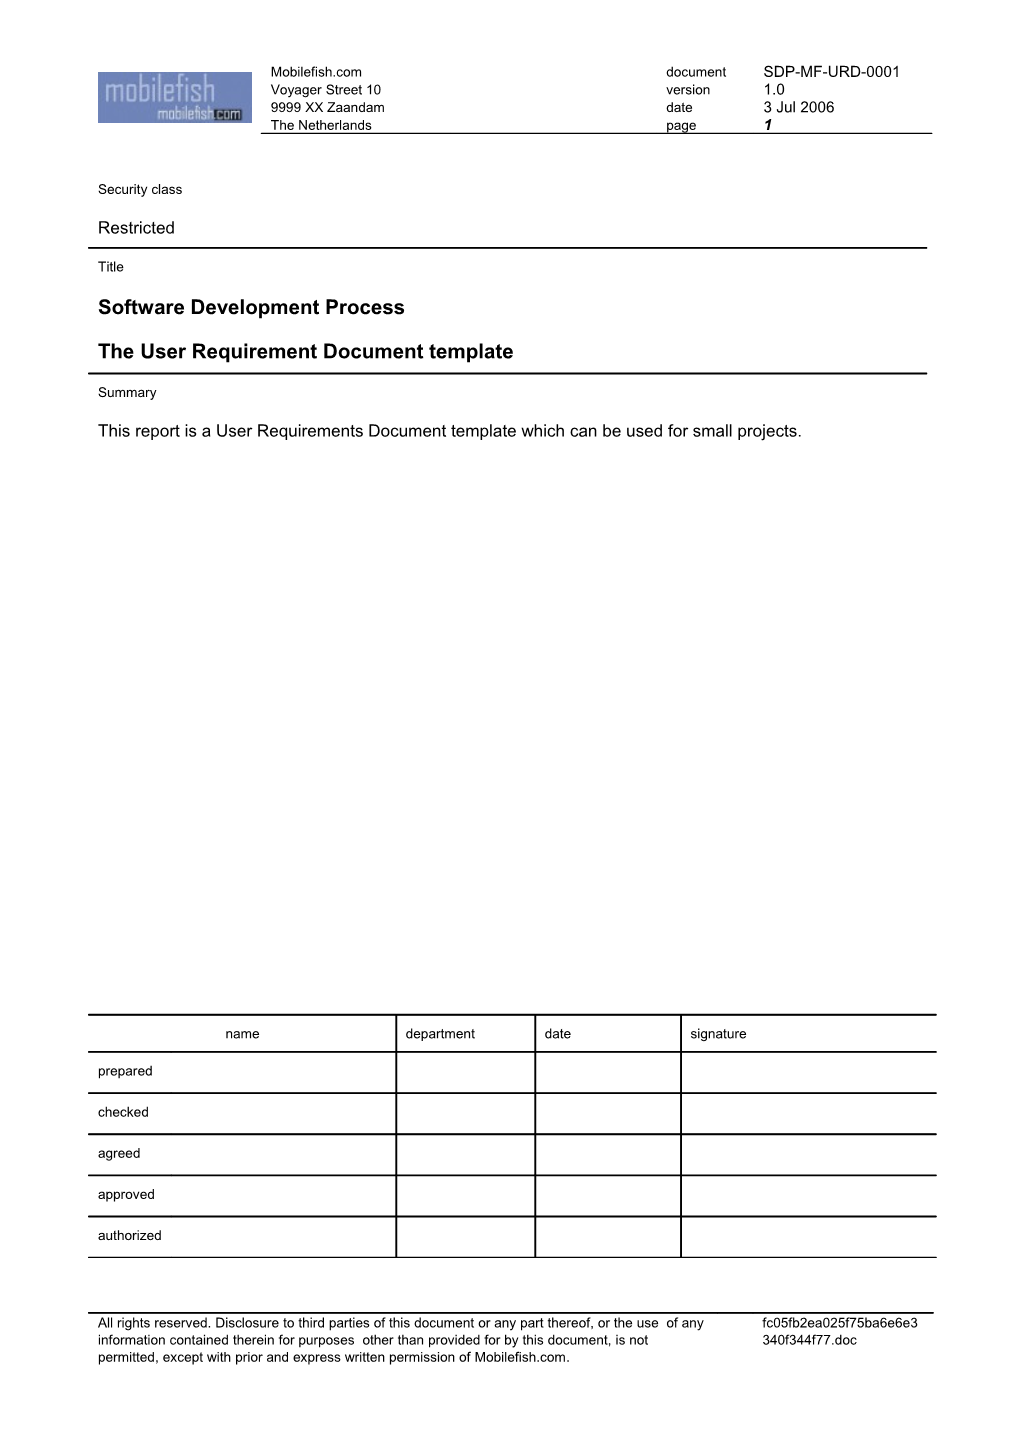 User Requirement Document (URD) Template